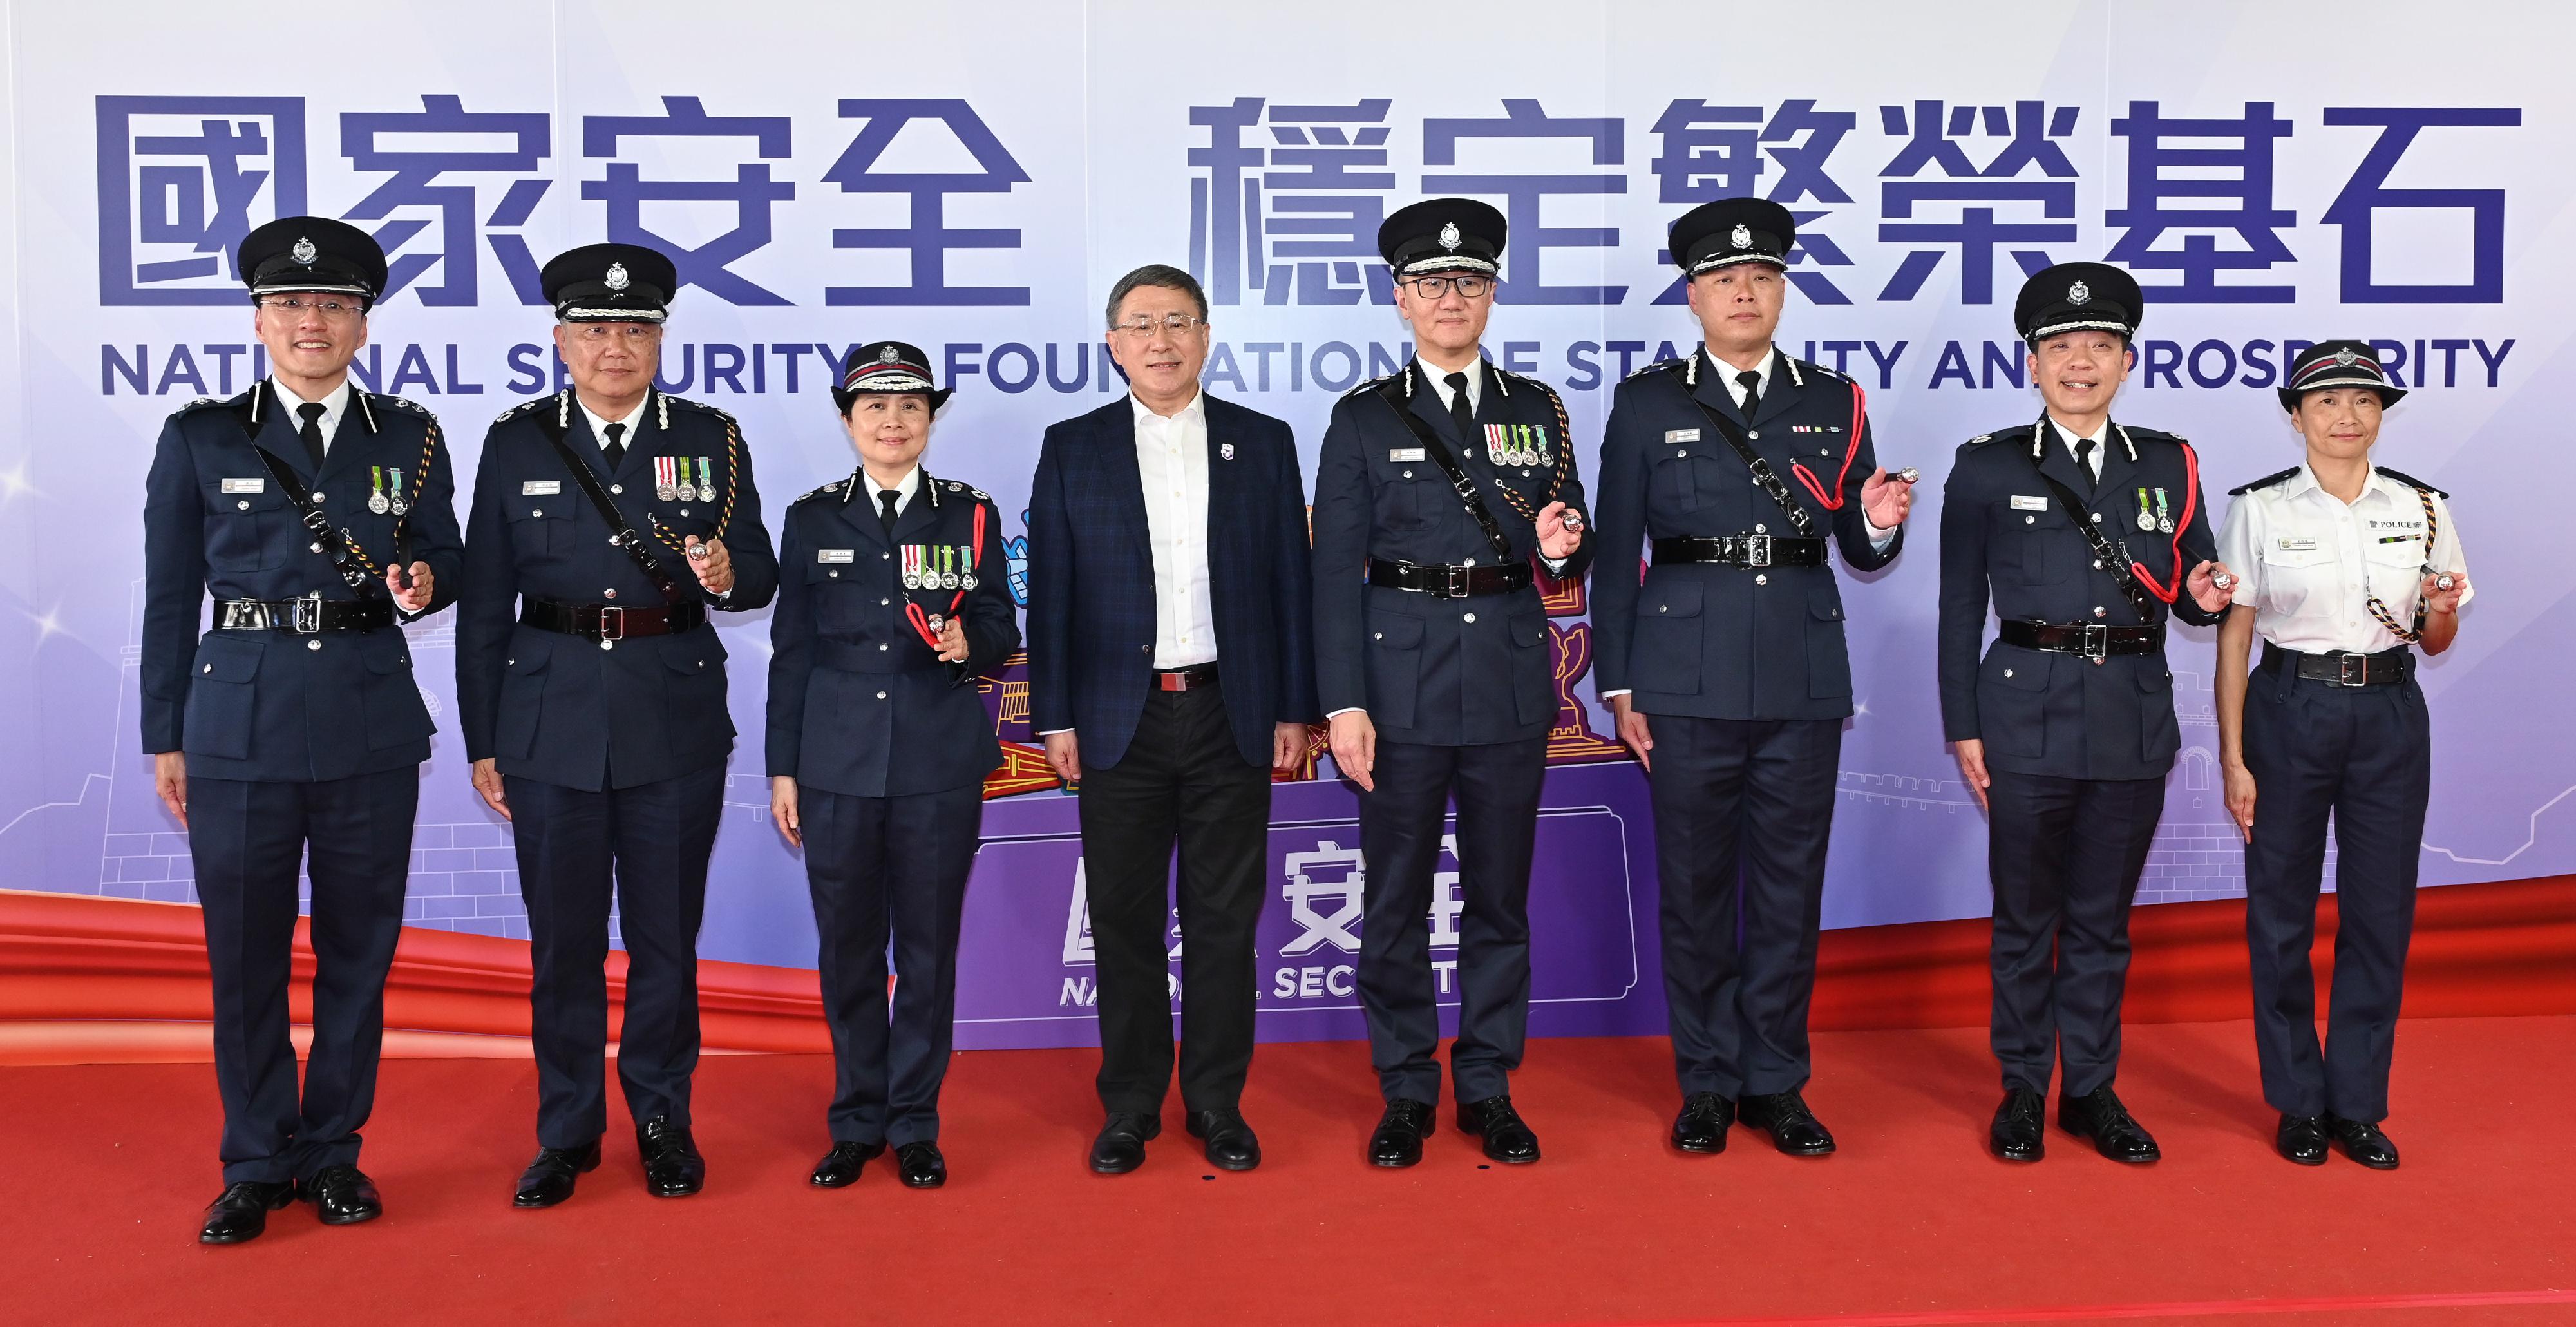 The Deputy Chief Secretary for Administration, Mr Cheuk Wing-hing (fourth left), accompanied by the Commissioner of Police, Mr Siu Chak-yee (fourth right), and other senior officials, attended the grand show of the Police College Open Day in support of the National Security Education Day.